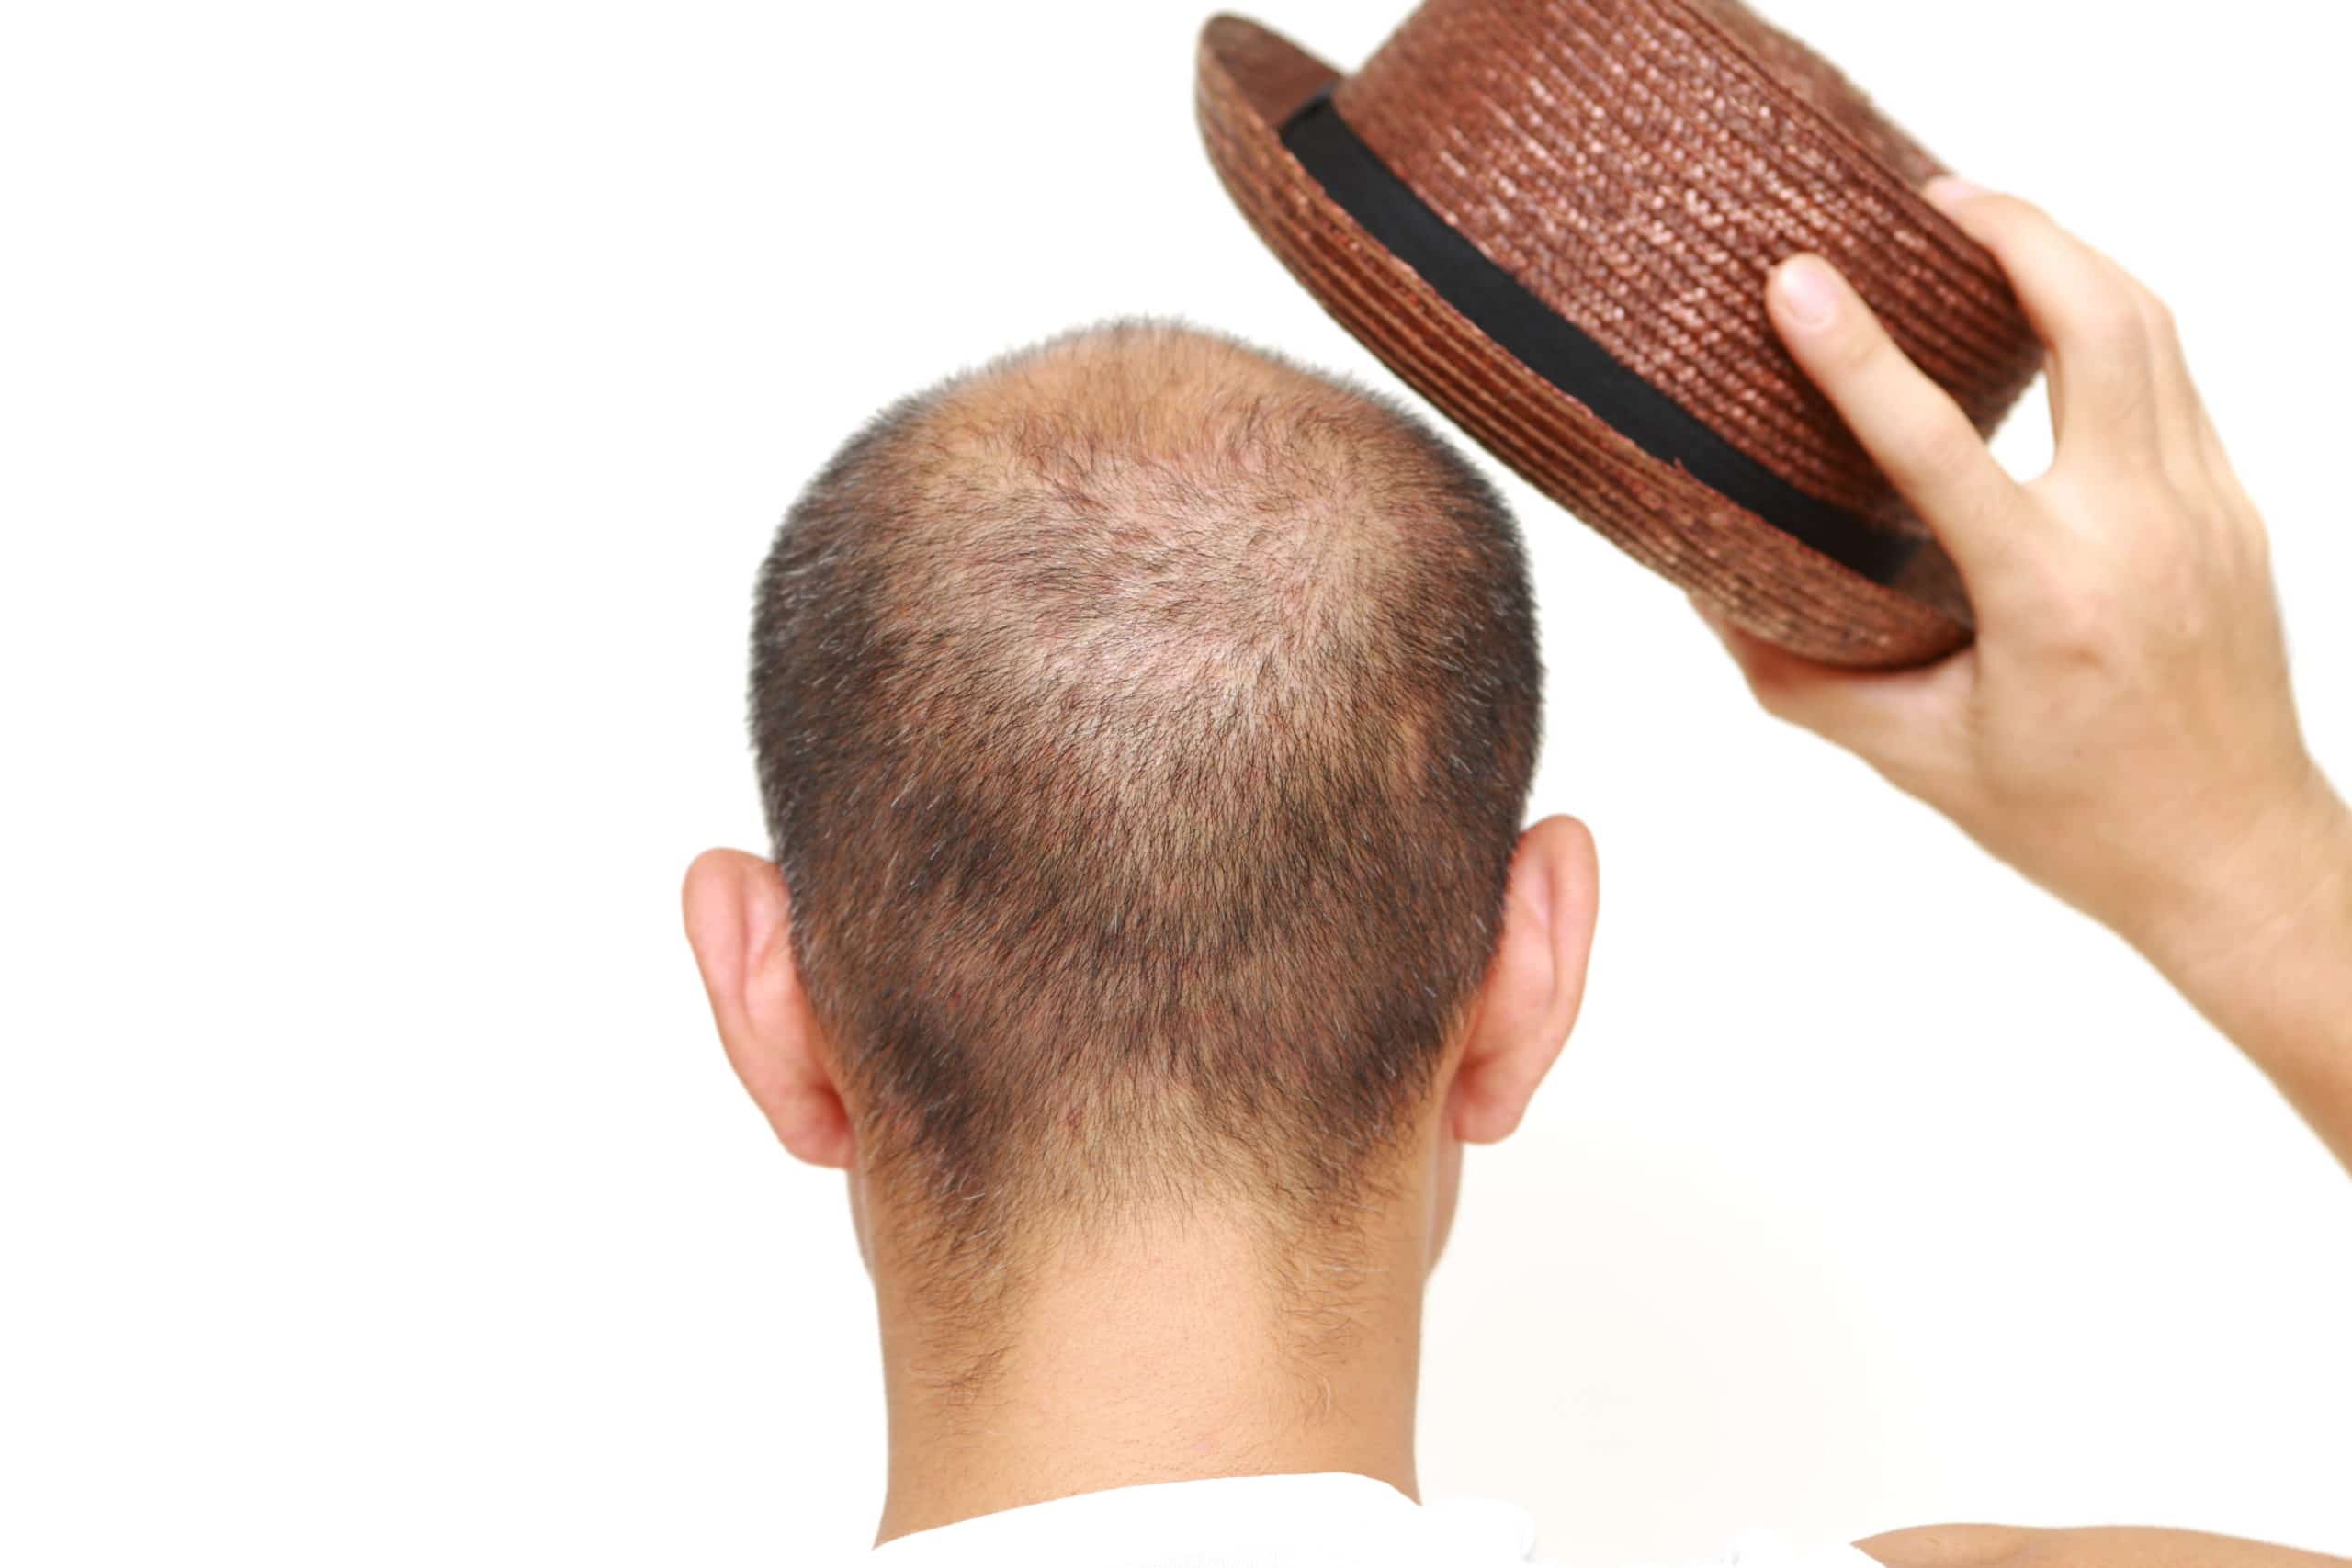 Does Wearing A Hat Cause Baldness? | Hair Loss Treatment